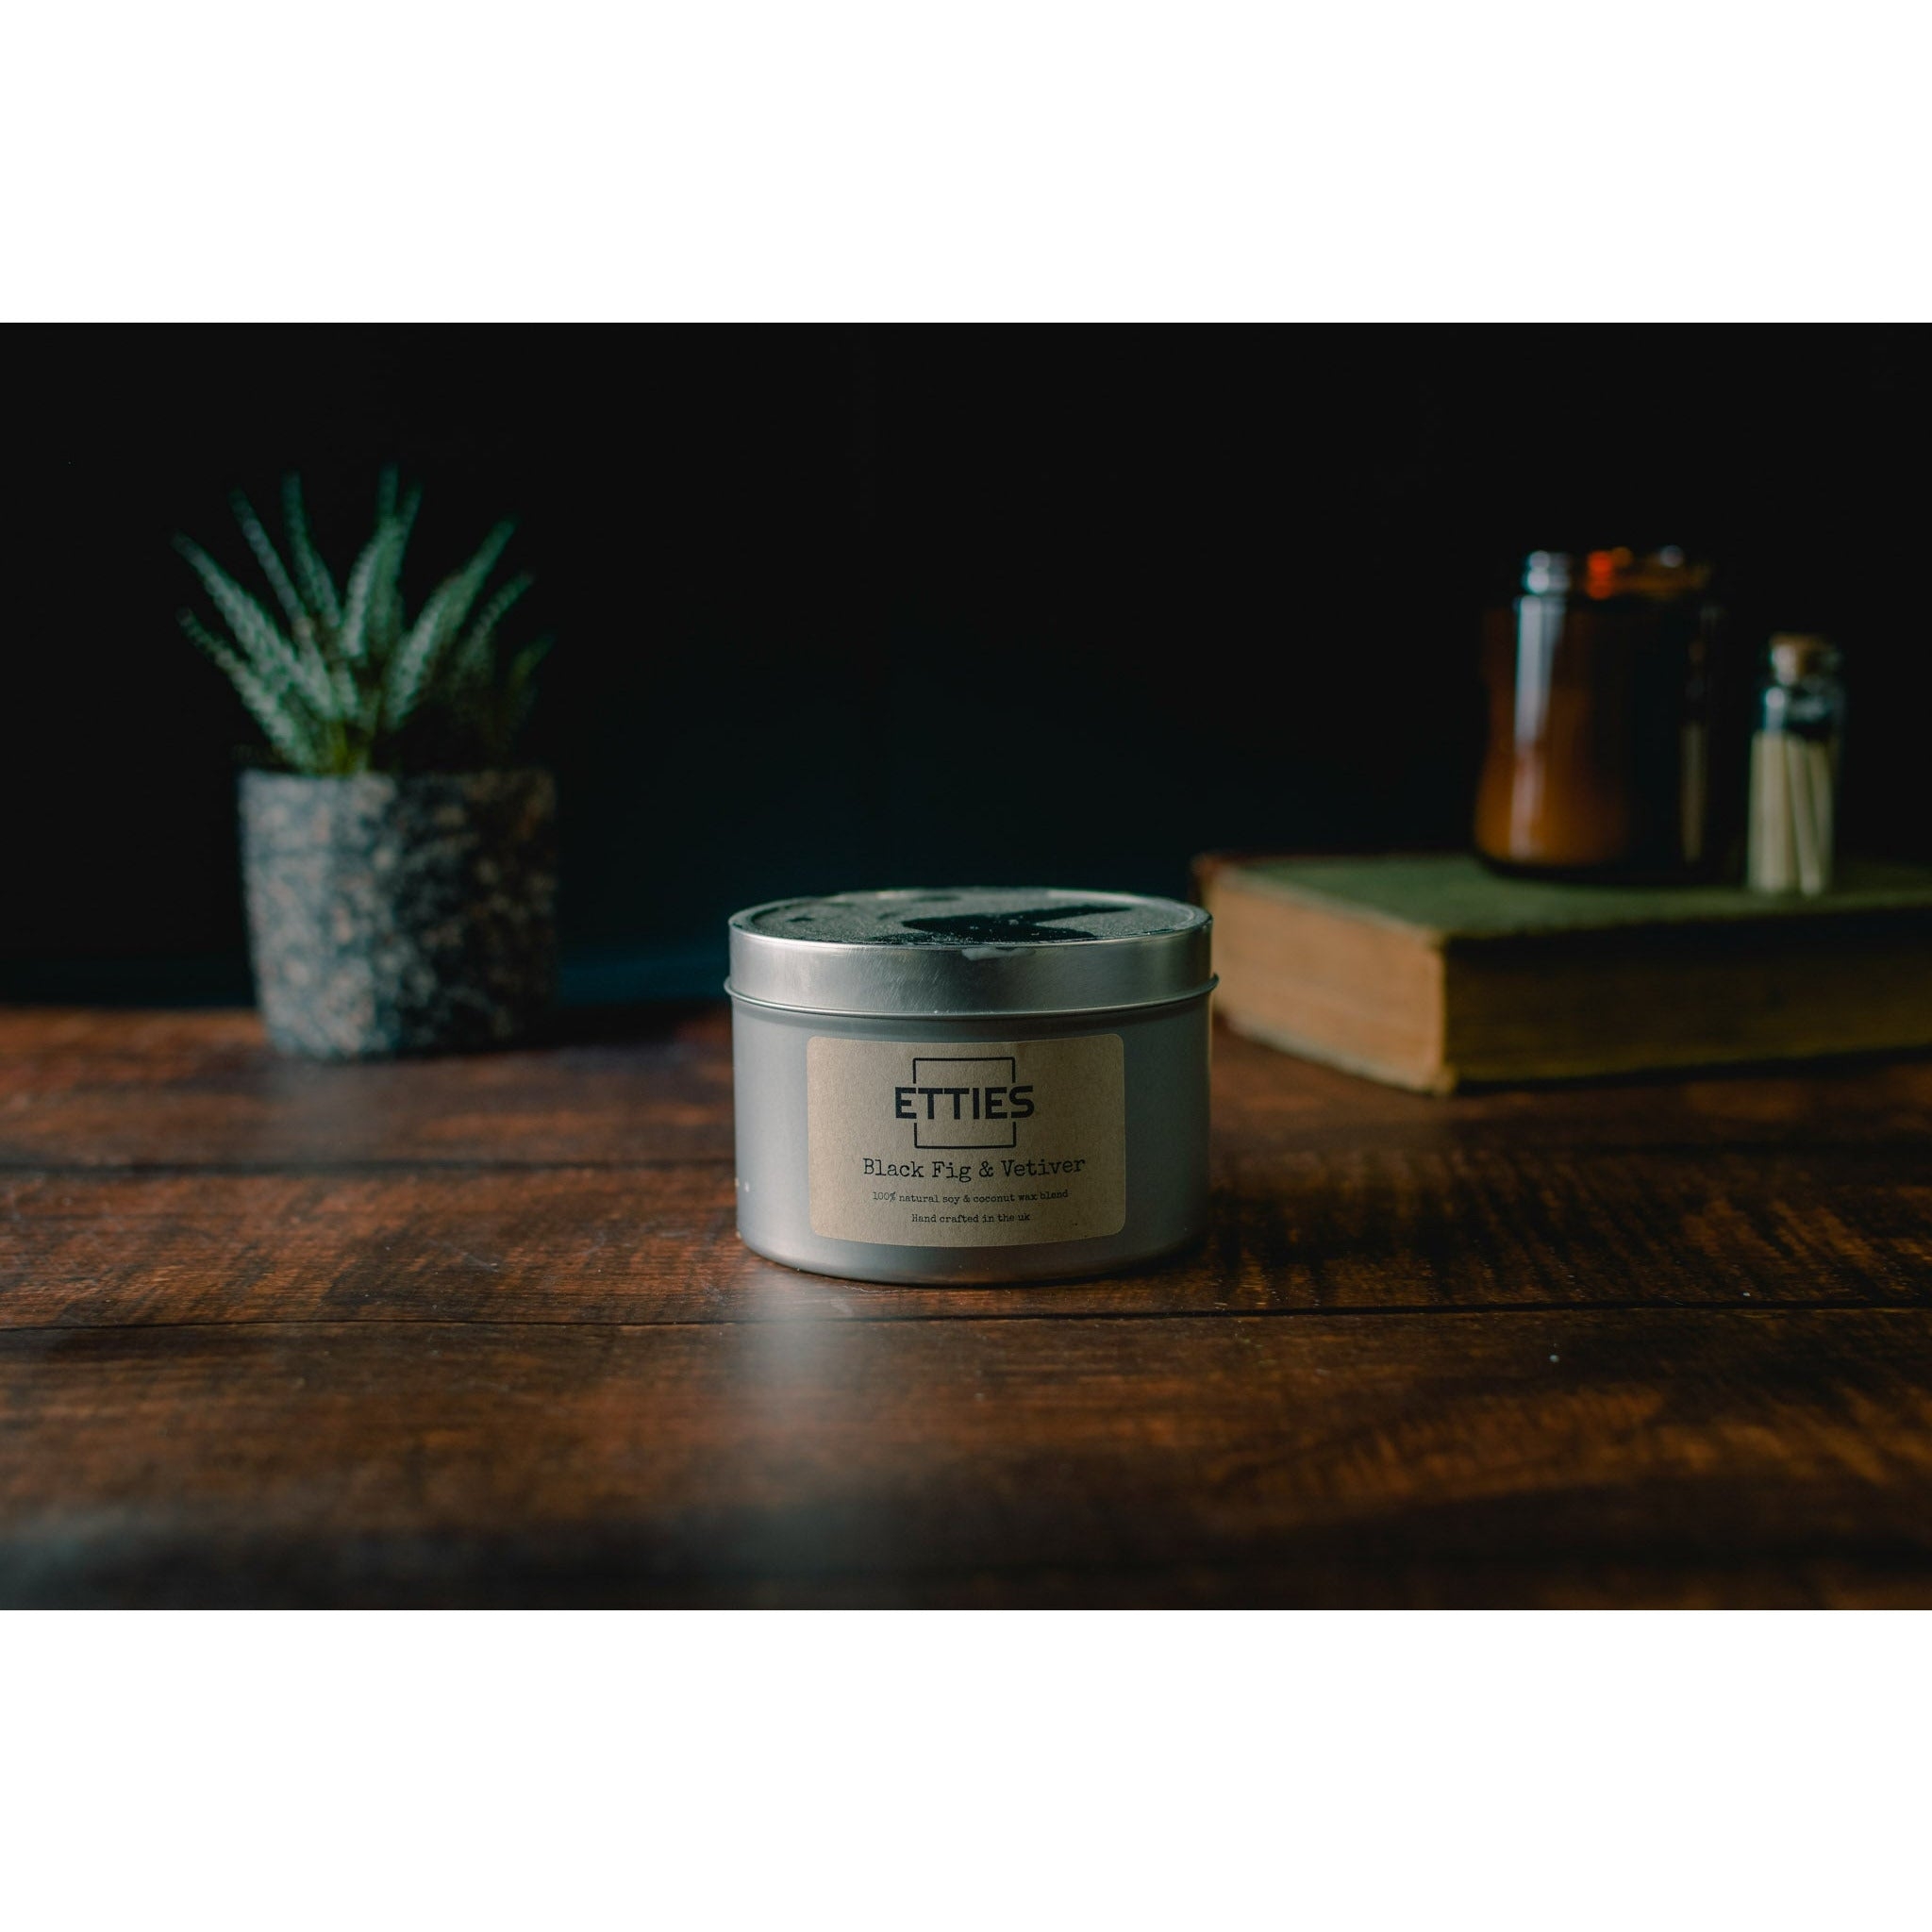 Black Fig & Vetiver Luxury Candle In TIn – 400ml – Etties Candles